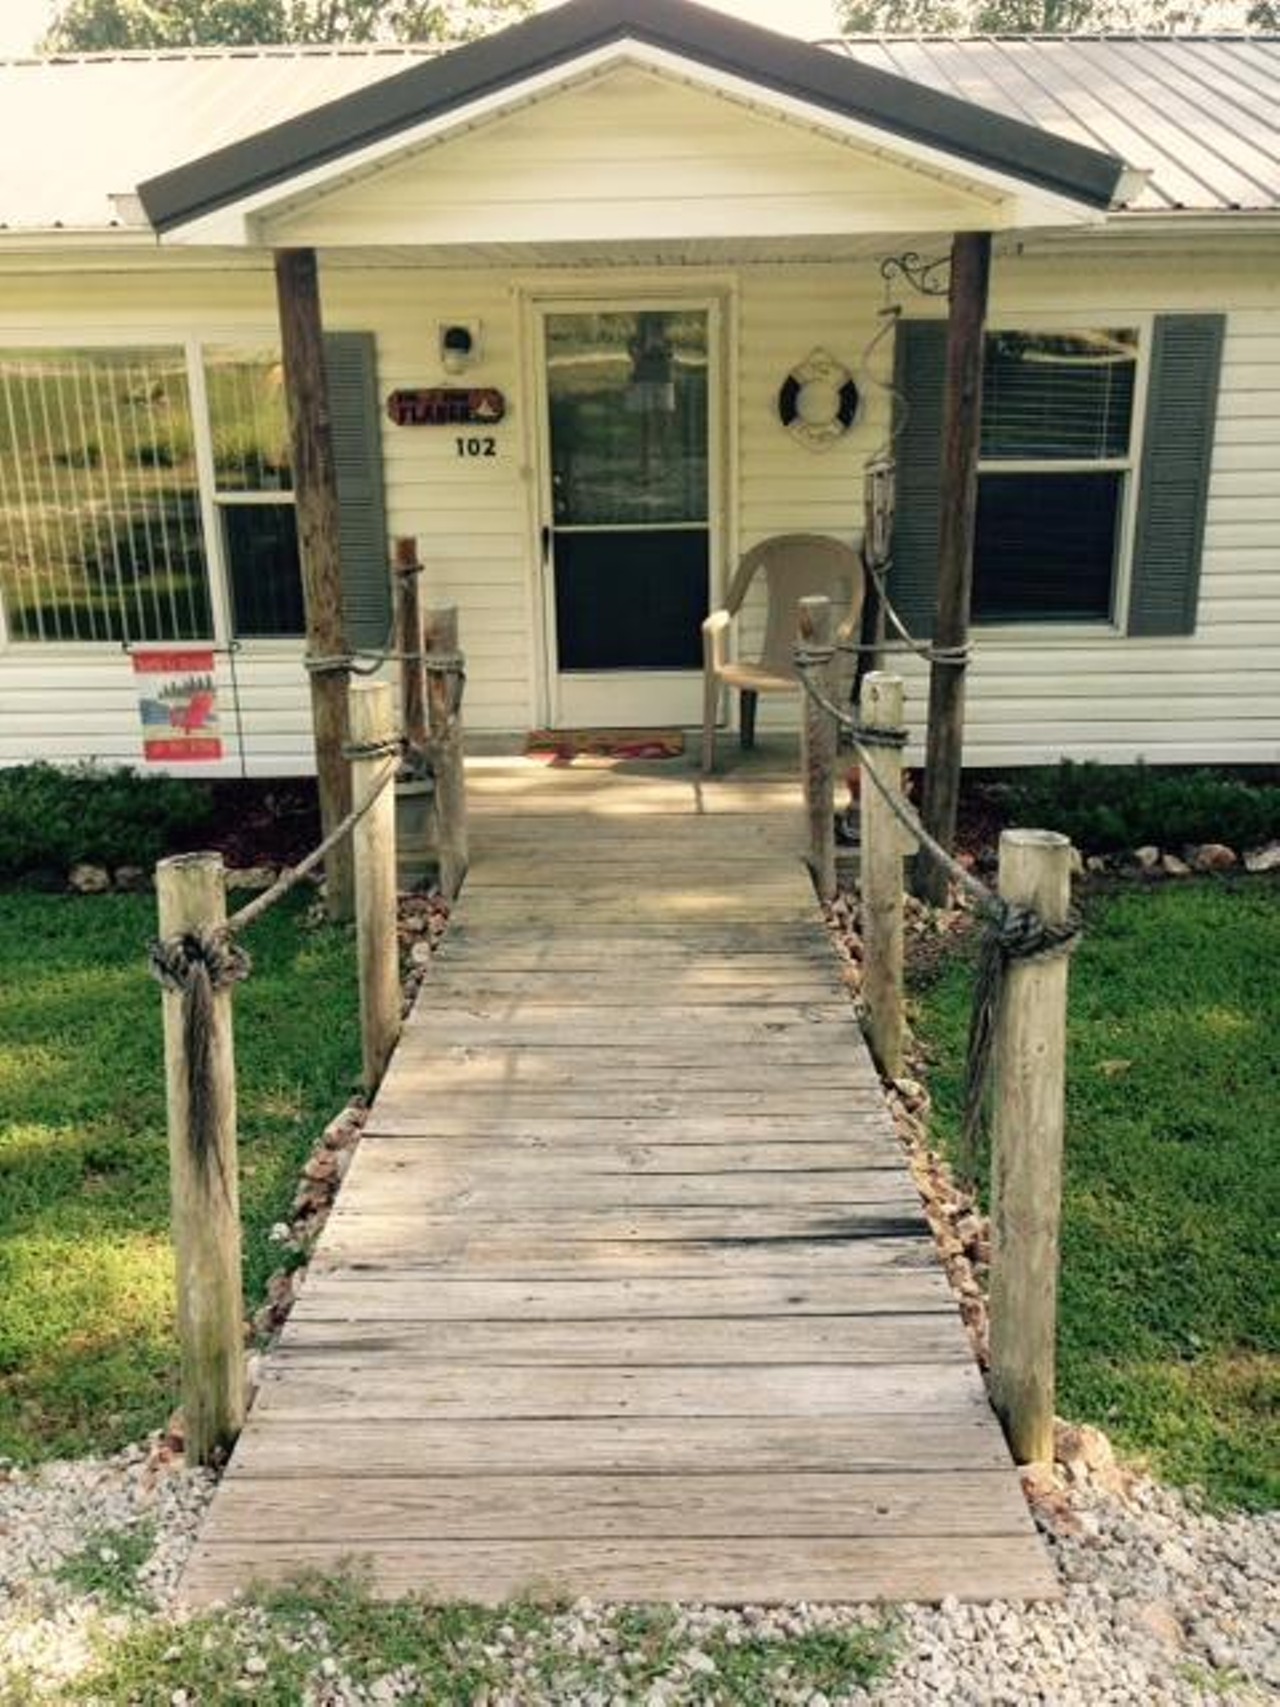 This property at 102 September Falls in Reeds Spring came down some $10K to land at just $1 under our $100K limit. Phew!